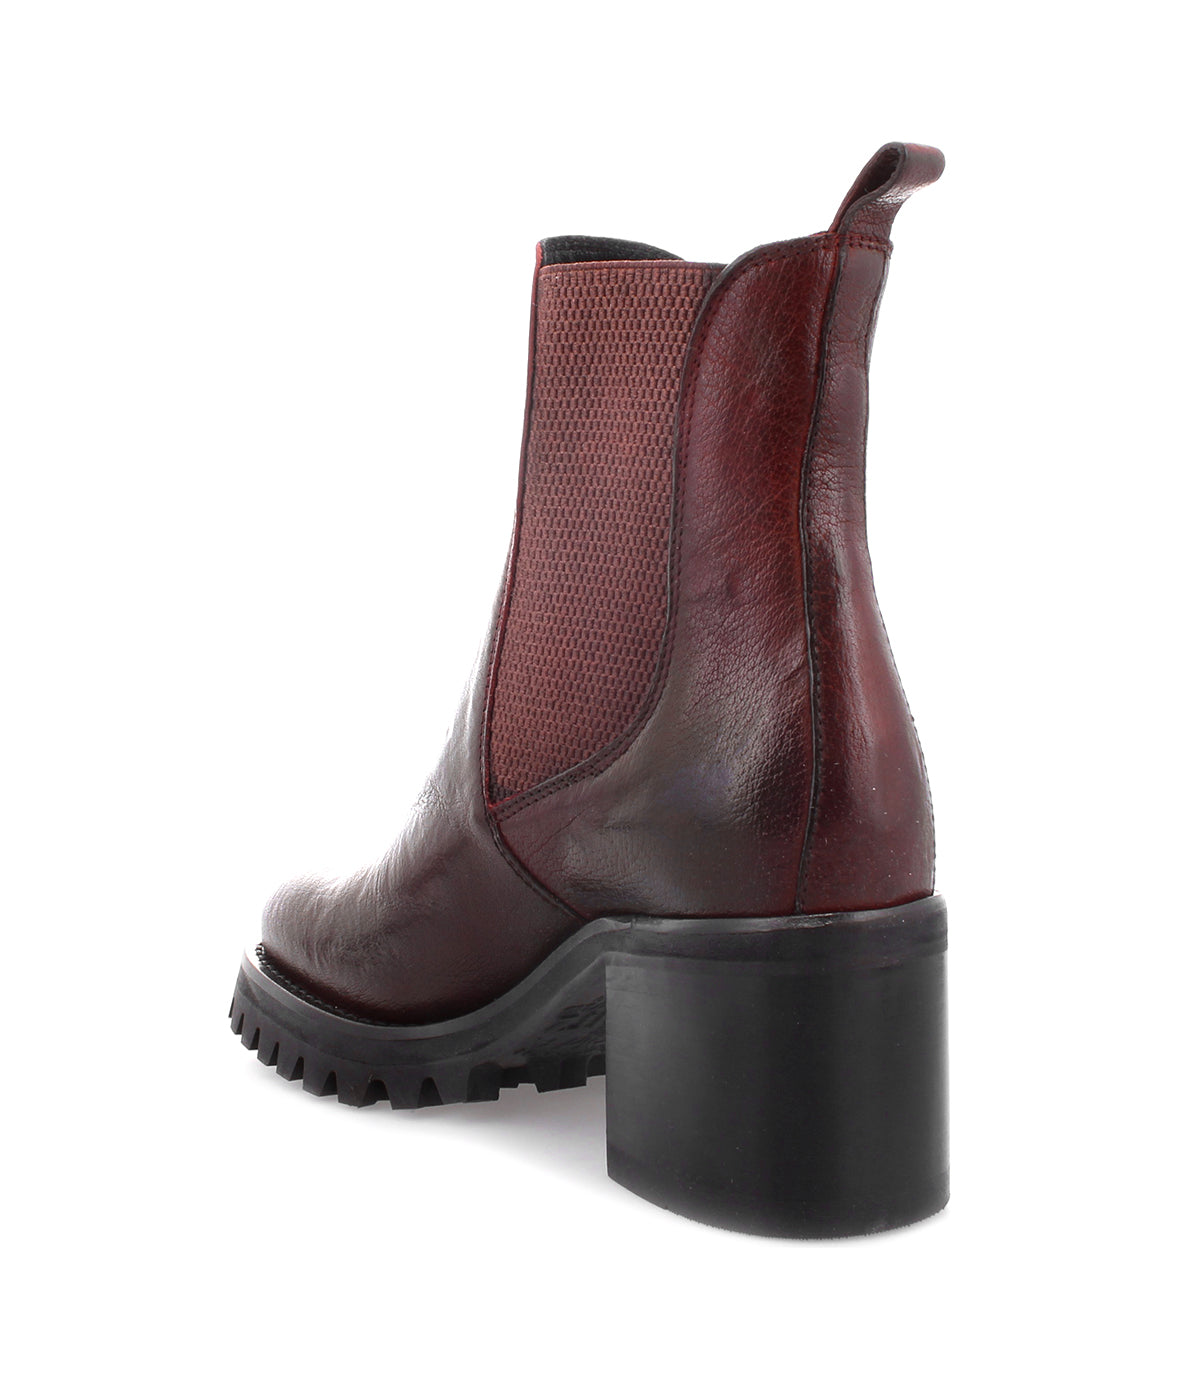 The Surge women's Chelsea boot in burgundy Italian leather by Bed Stu.